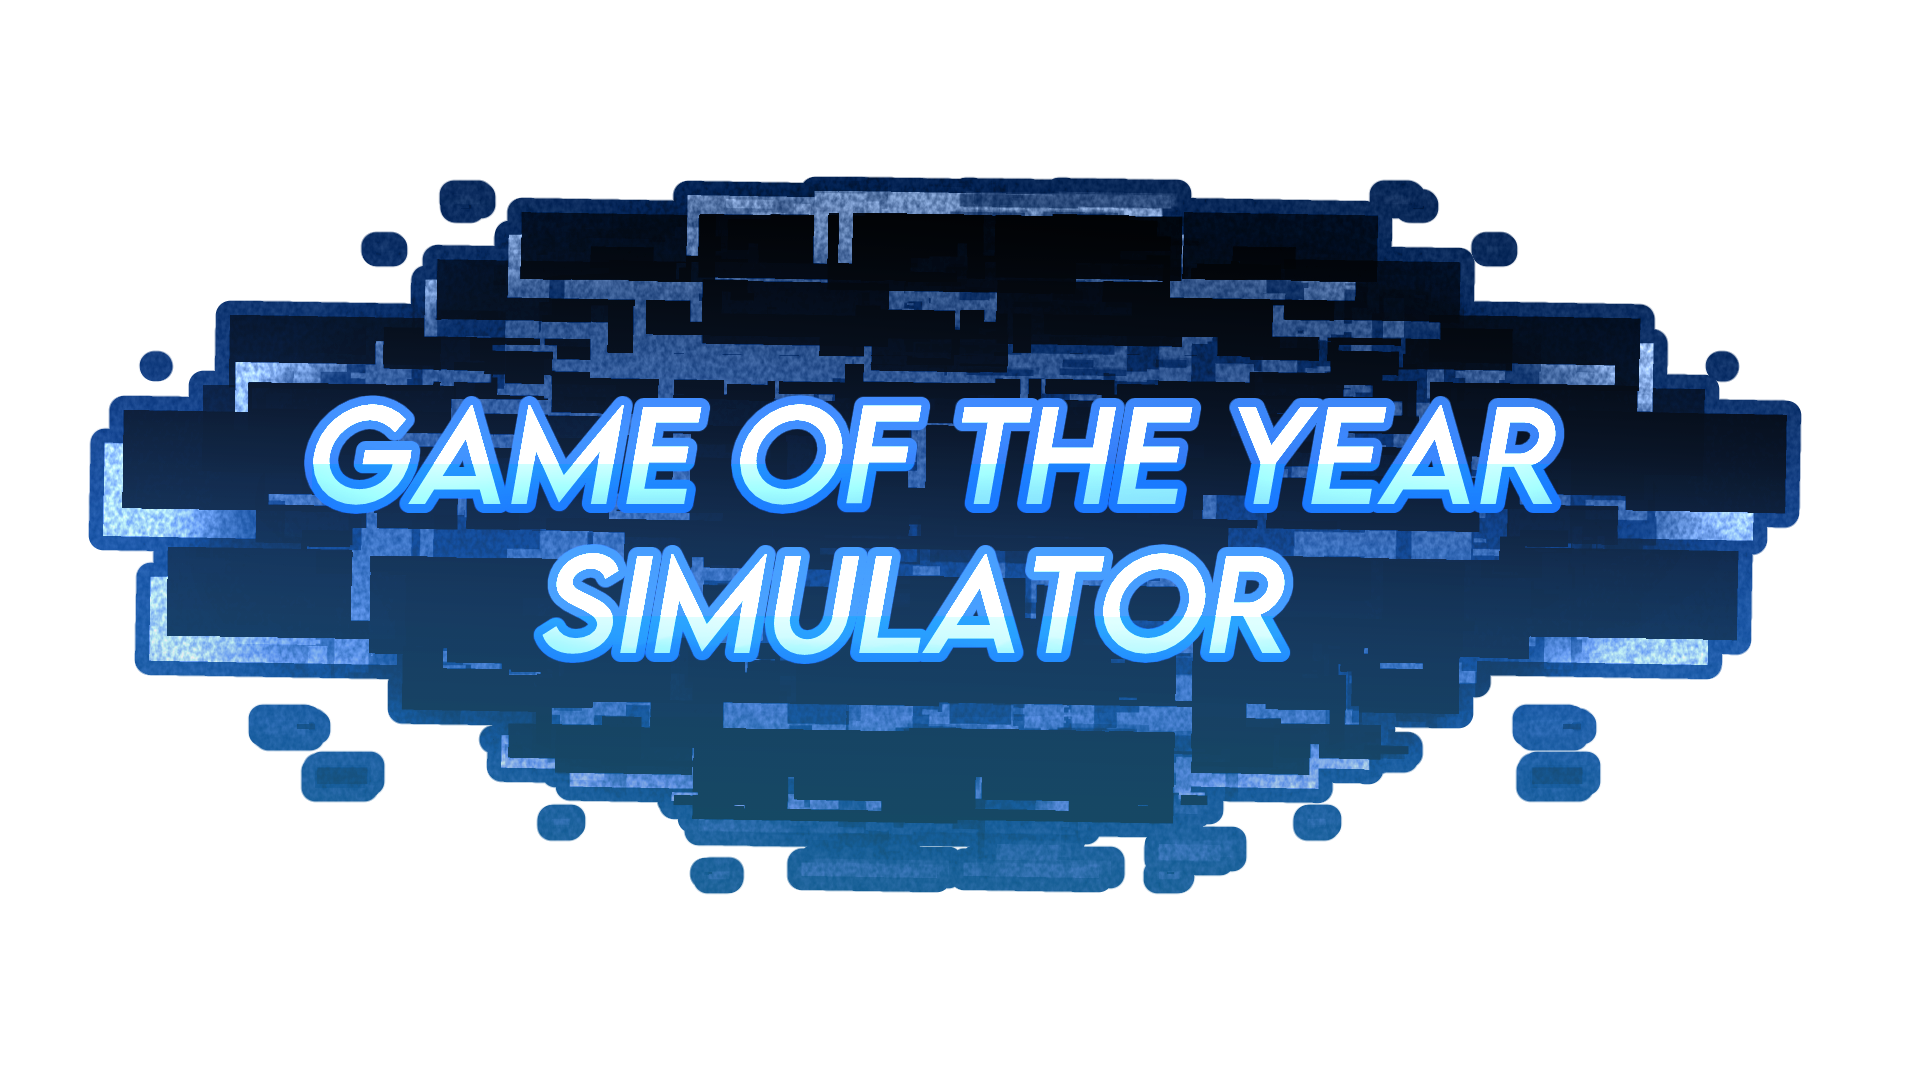 Game of the Year Simulator